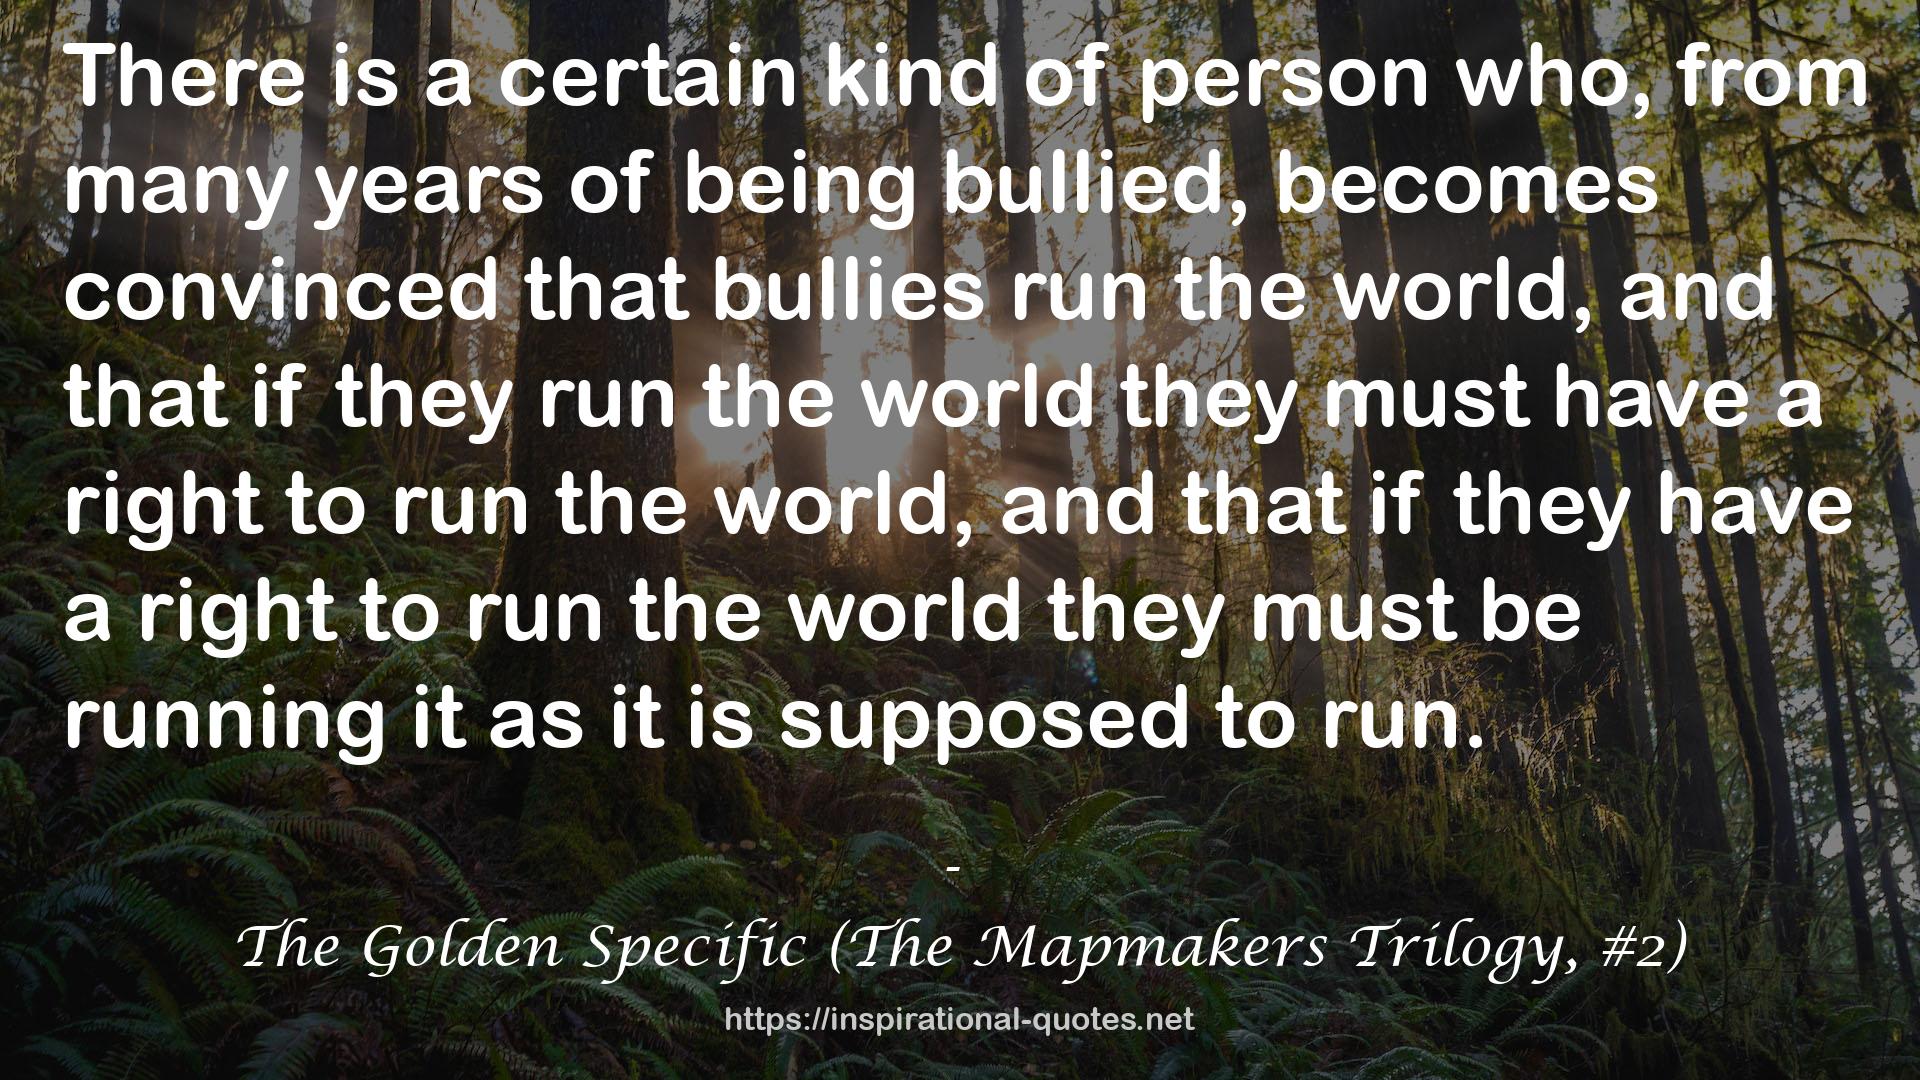 The Golden Specific (The Mapmakers Trilogy, #2) QUOTES